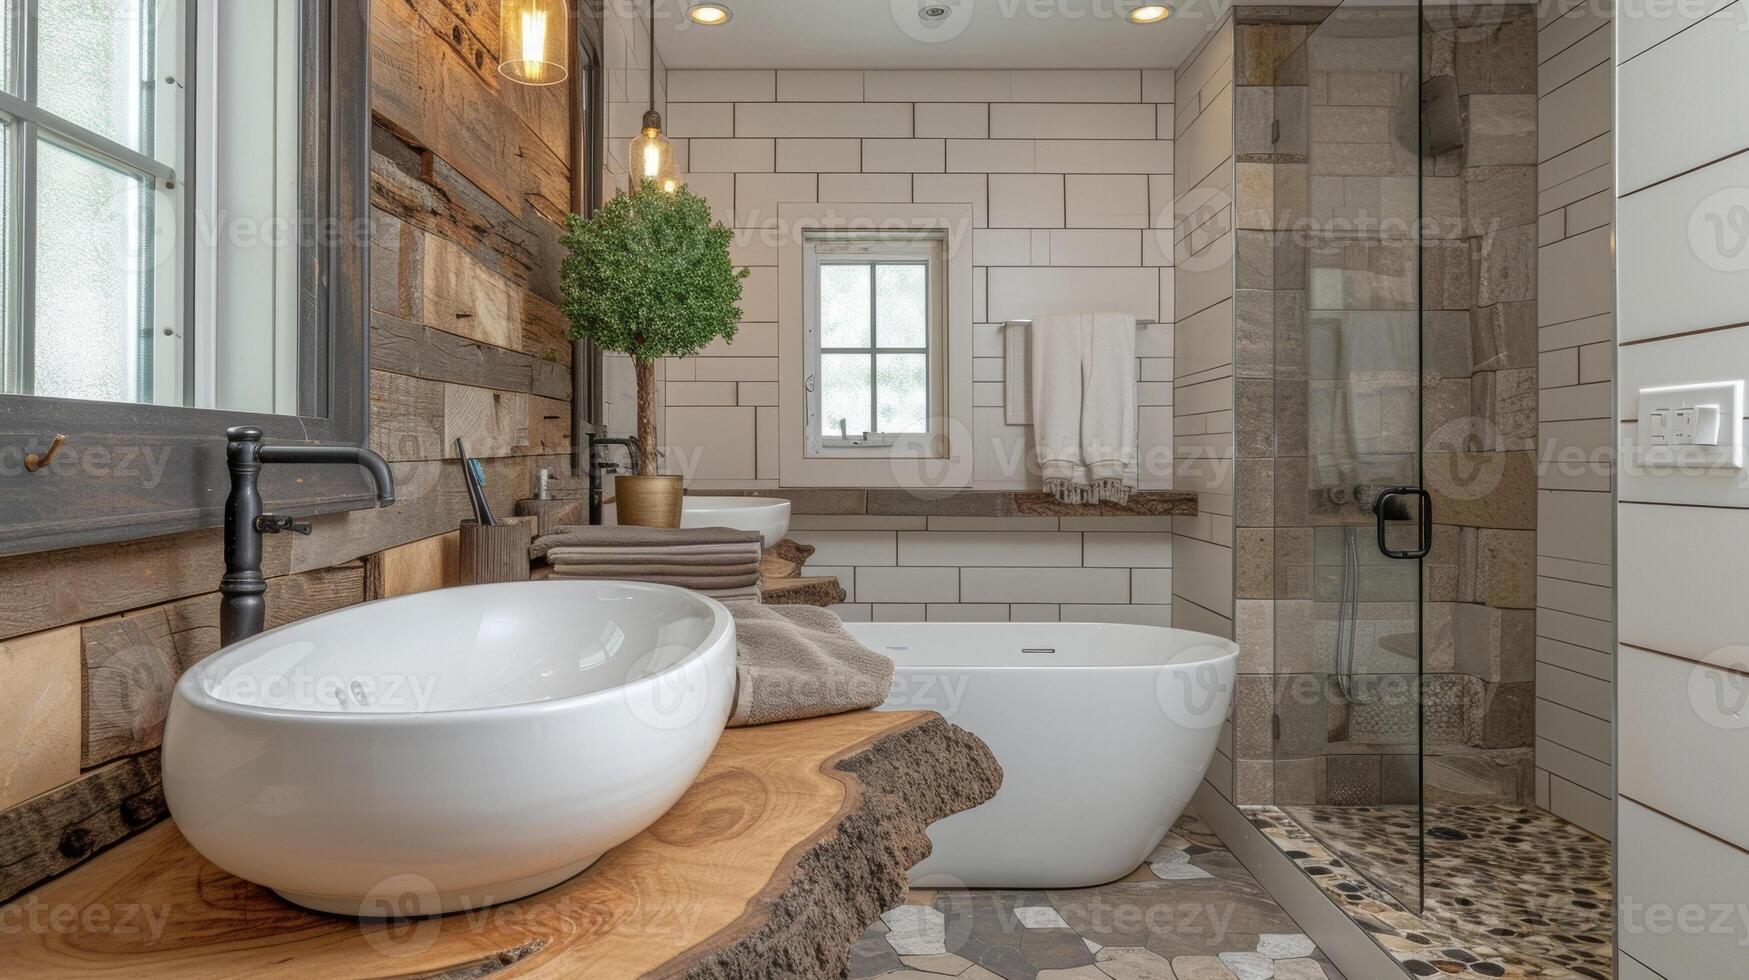 A bathroom with a log vanity adding a rustic touch to the modern design photo